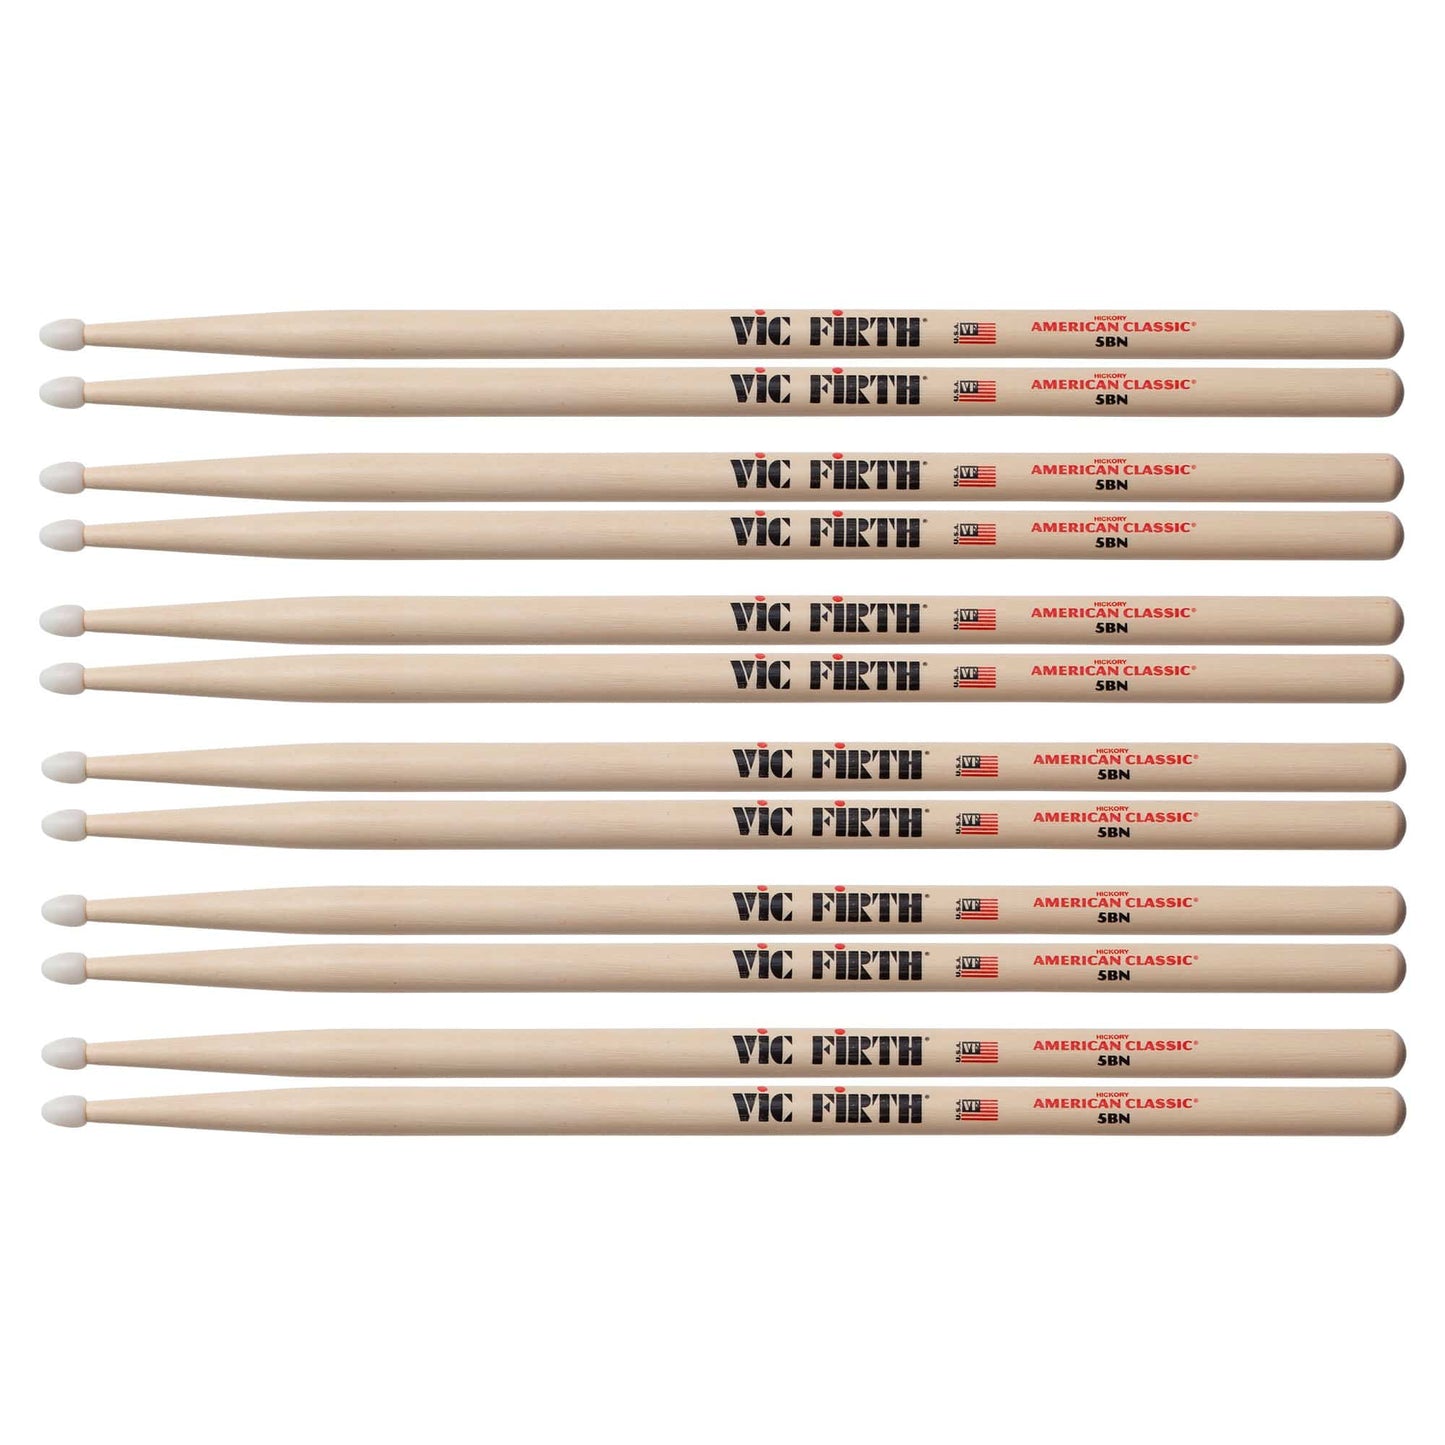 Vic Firth American Classic 5B Nylon Tip Drum Sticks (6 Pair Bundle) Drums and Percussion / Parts and Accessories / Drum Sticks and Mallets